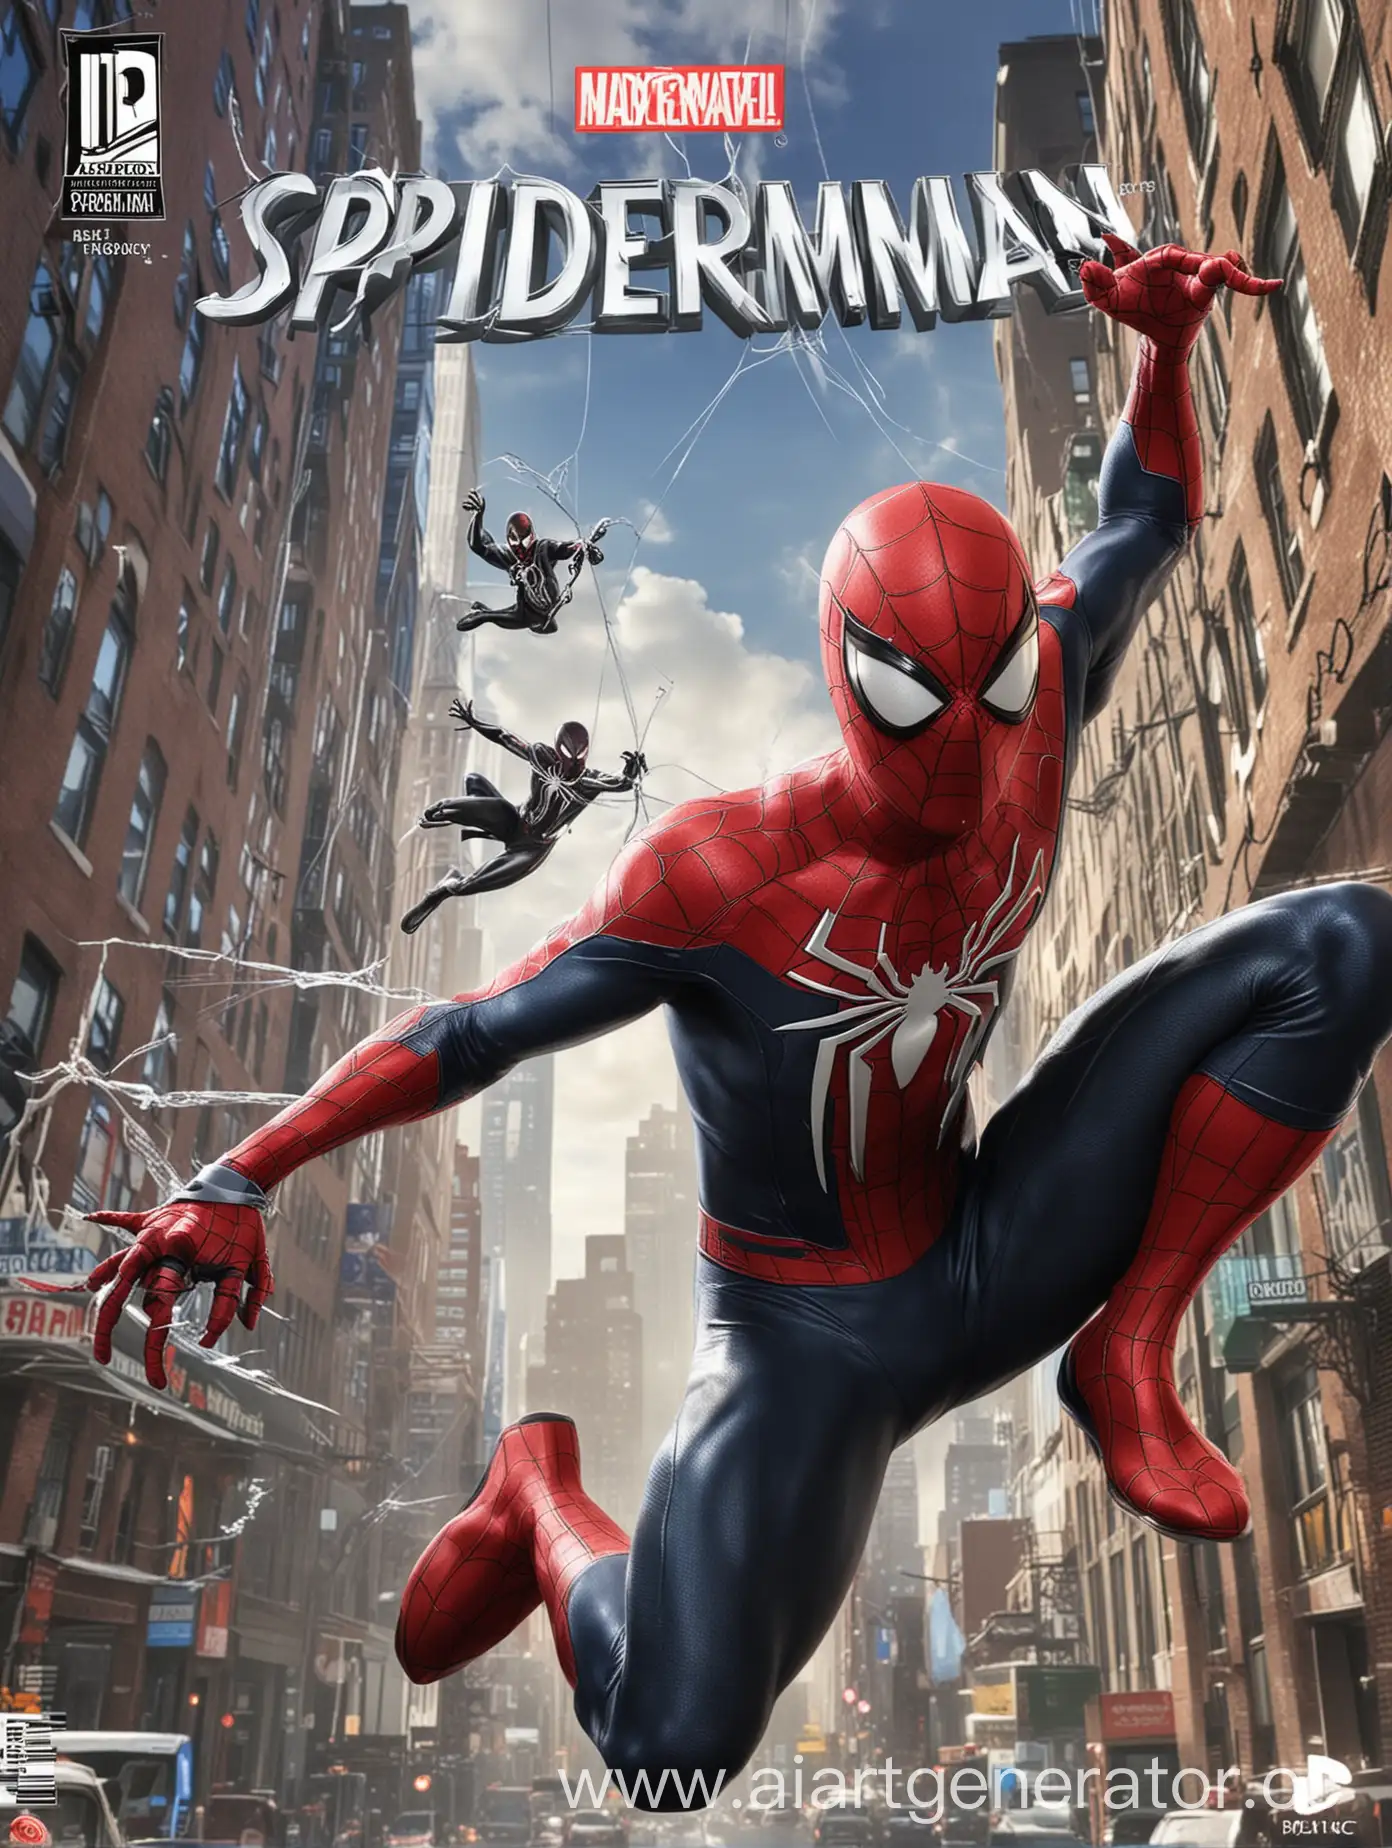 Generate a cover for the playstation 5 spider-Man 3 disc. The cover should be Spider-Man, and Spider-Girl, gwen stacy